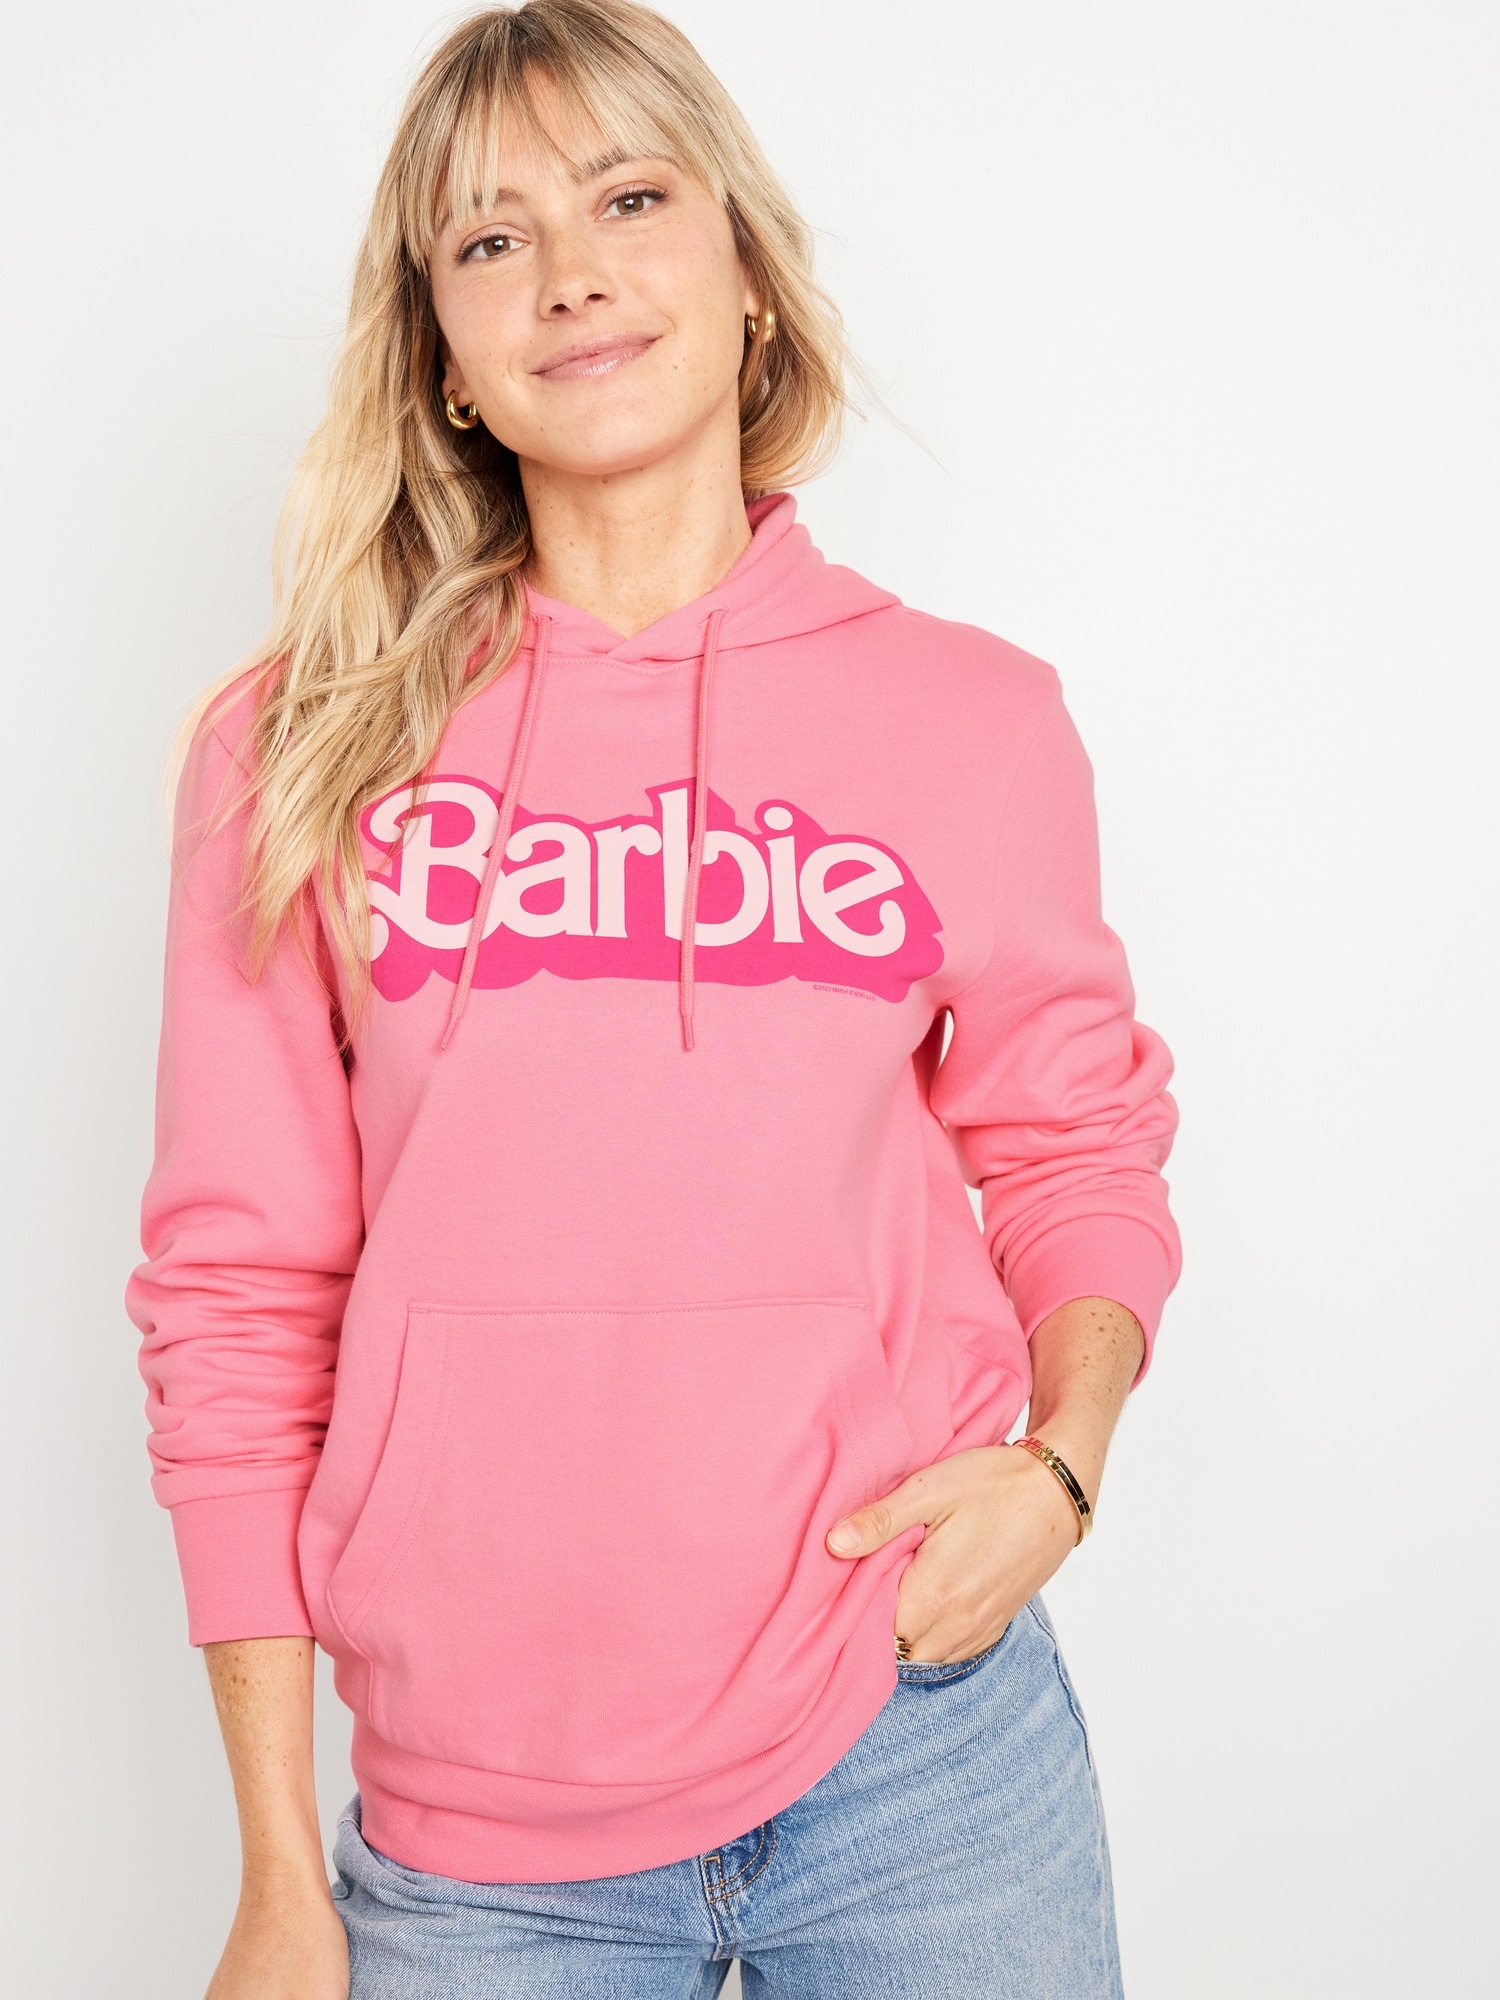 Barbie™ Gender-Neutral Pullover Hoodie for Adults